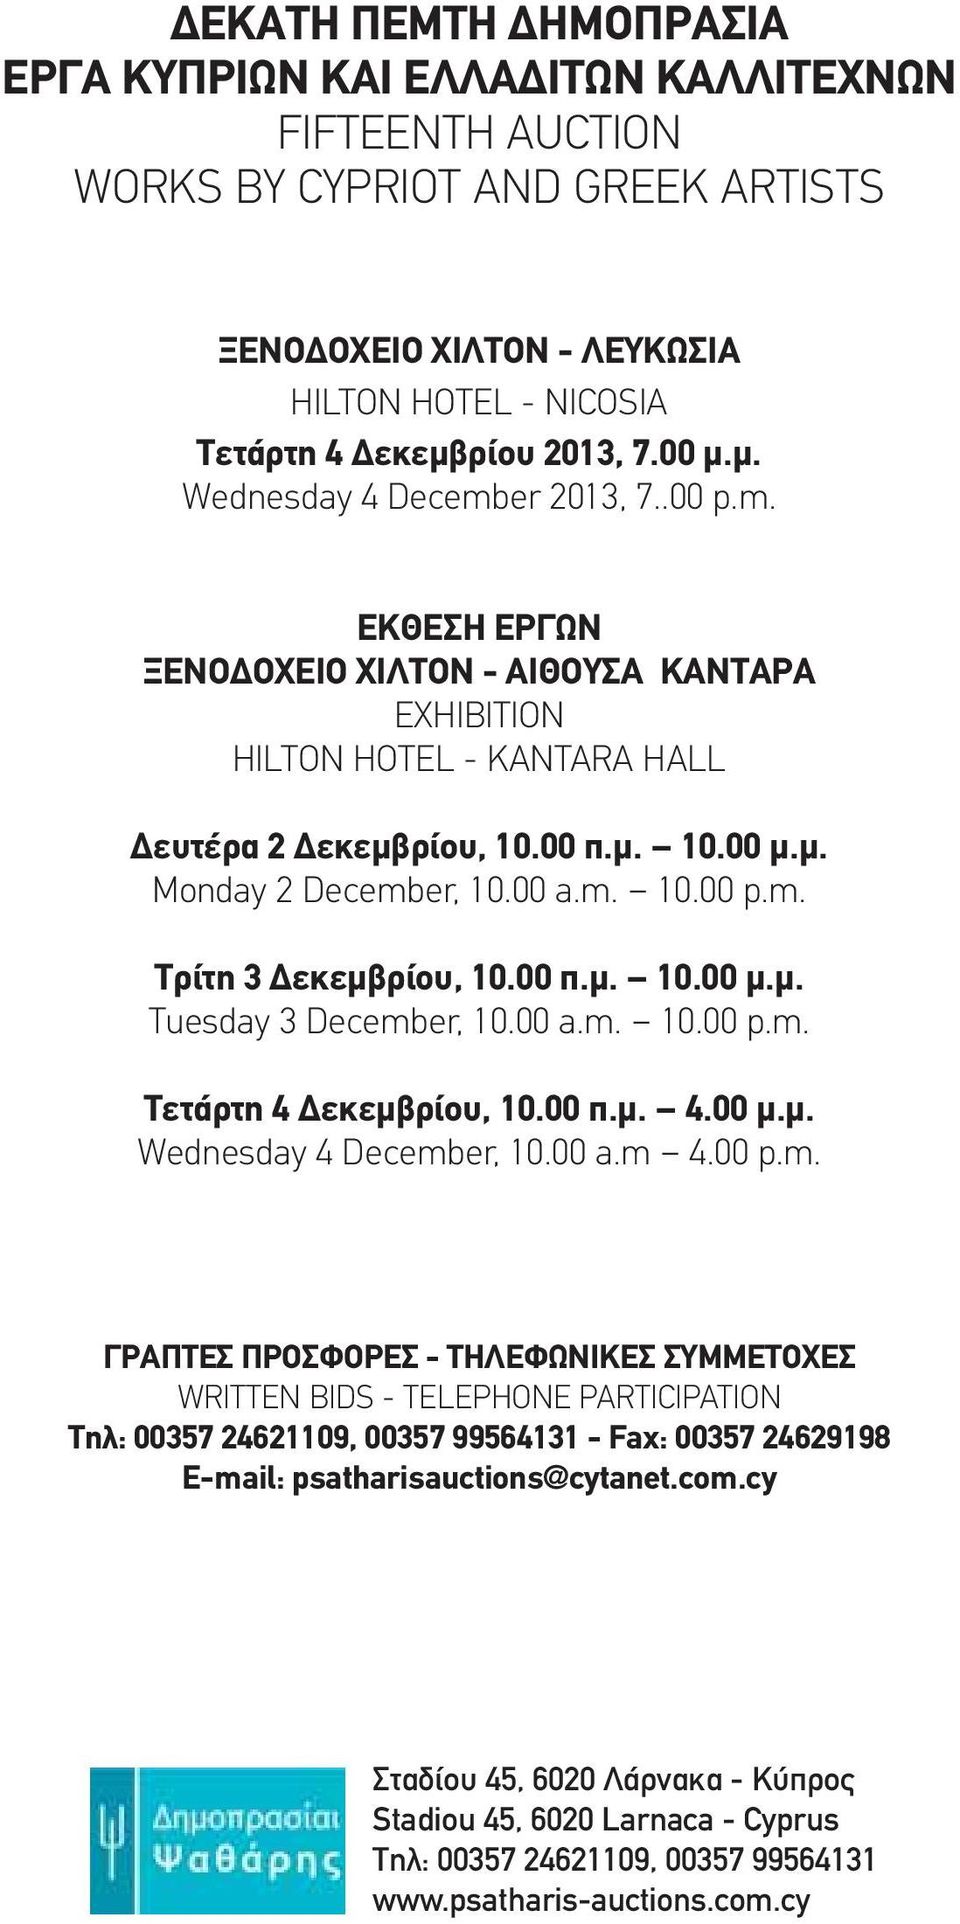 00 a.m. 10.00 p.m. Τρίτη 3 Δεκεμβρίου, 10.00 π.μ. 10.00 μ.μ. Tuesday 3 December, 10.00 a.m. 10.00 p.m. Τετάρτη 4 Δεκεμβρίου, 10.00 π.μ. 4.00 μ.μ. Wednesday 4 December, 10.00 a.m 4.00 p.m. ΓΡΑΠΤΕΣ ΠΡΟΣΦΟΡΕΣ - ΤΗΛΕΦΩΝΙΚΕΣ ΣΥΜΜΕΤΟΧΕΣ WRITTEN BIDS - TELEPHONE PARTICIPATION Τηλ: 00357 24621109, 00357 99564131 - Fax: 00357 24629198 E-mail: psatharisauctions@cytanet.